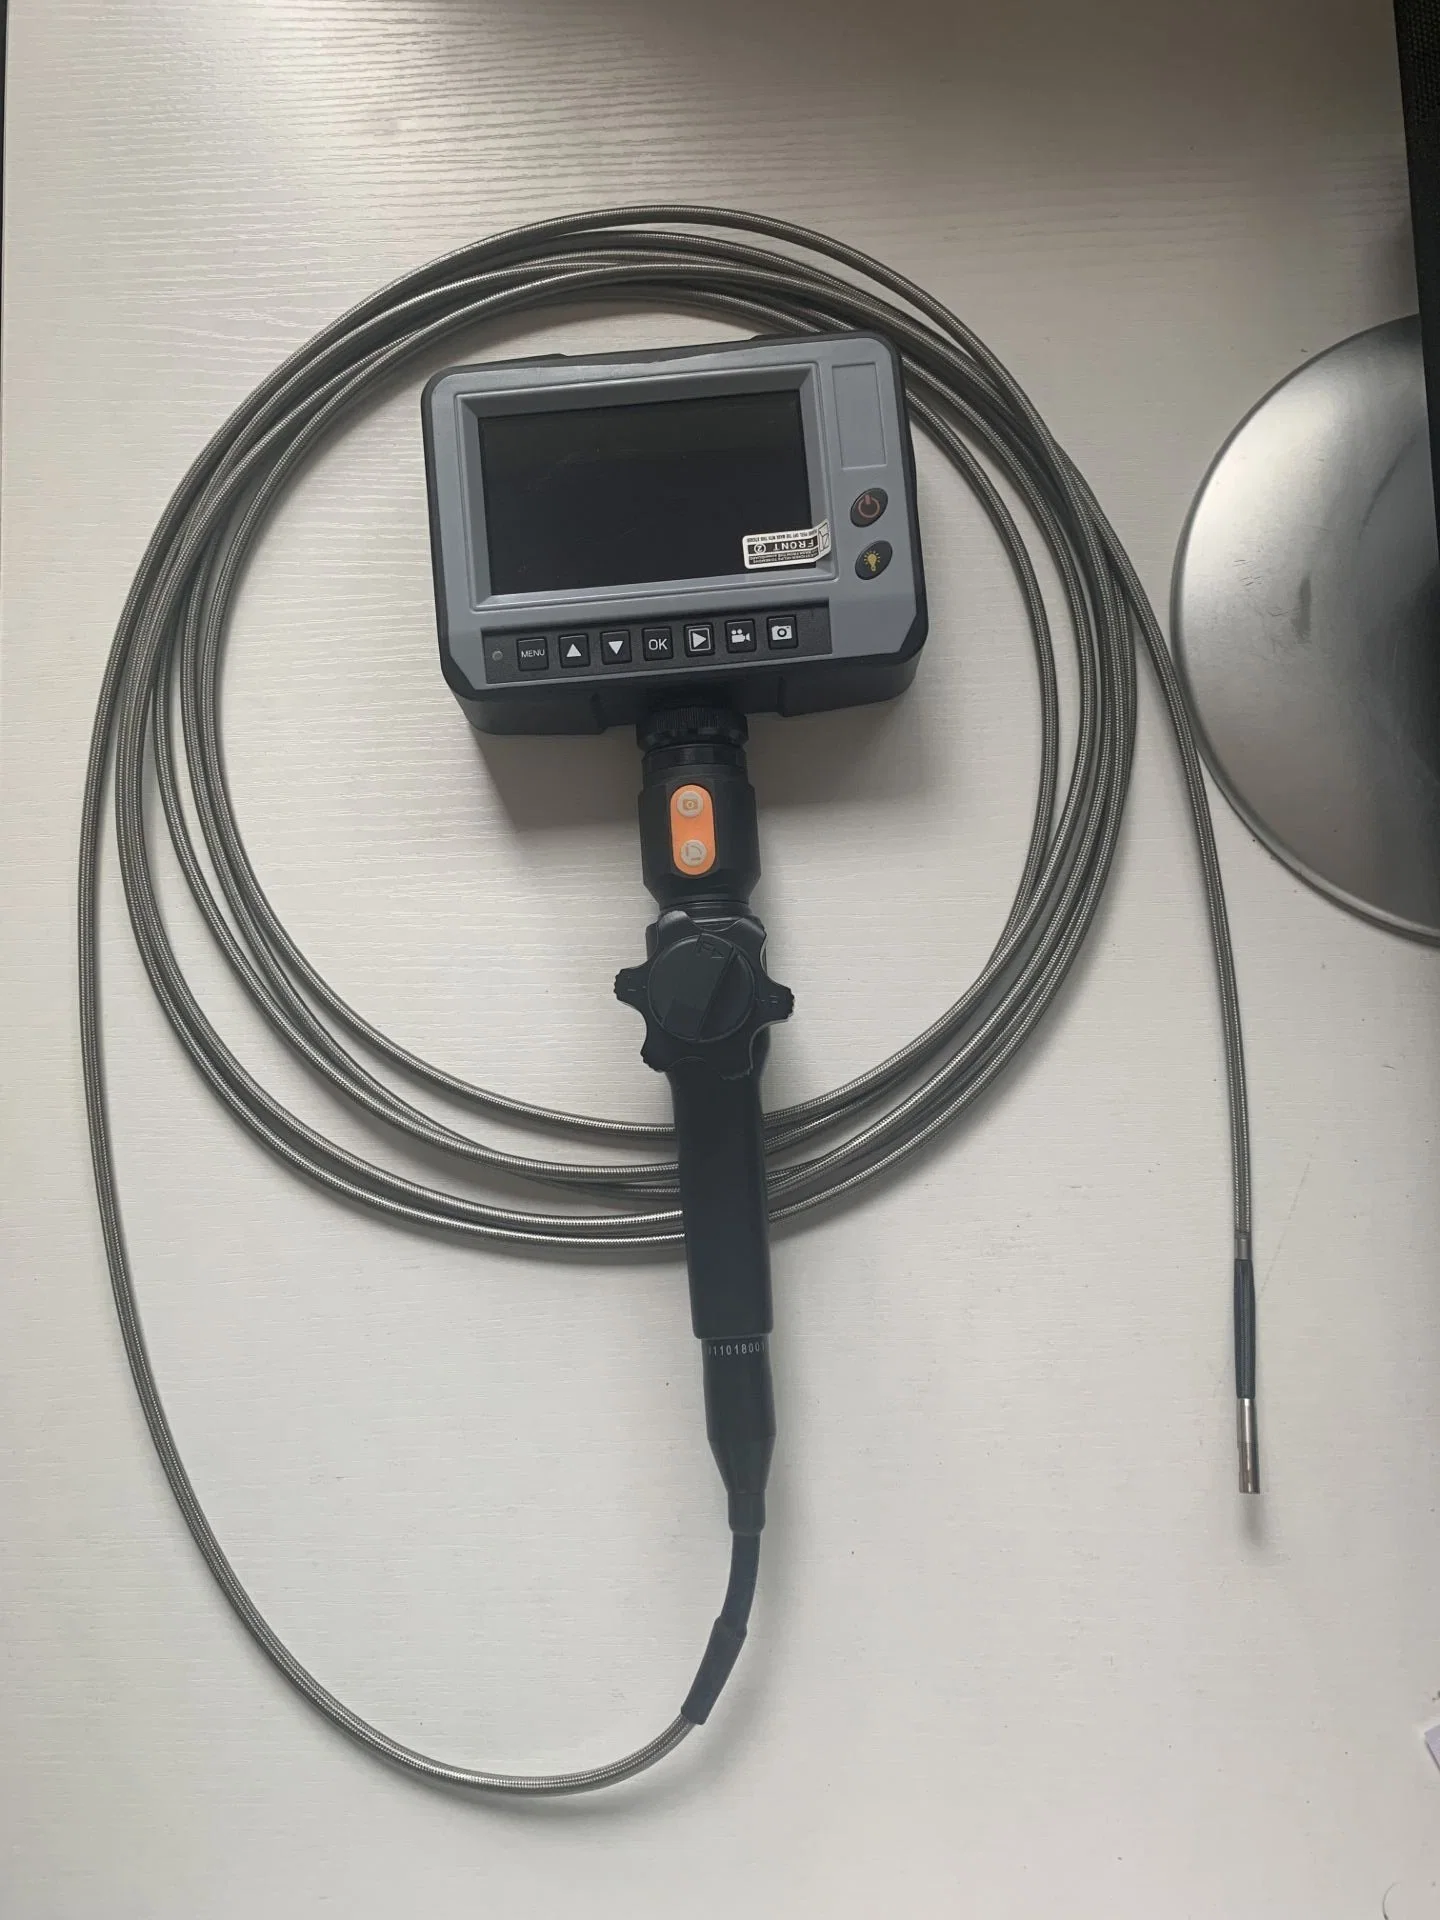 Flexible Industrial Video Endoscope with 6mm Dual Lens, 2 Way Articulation, Waterproof IP67, 4.5 Inches Display, 1.5mts Testing Cable